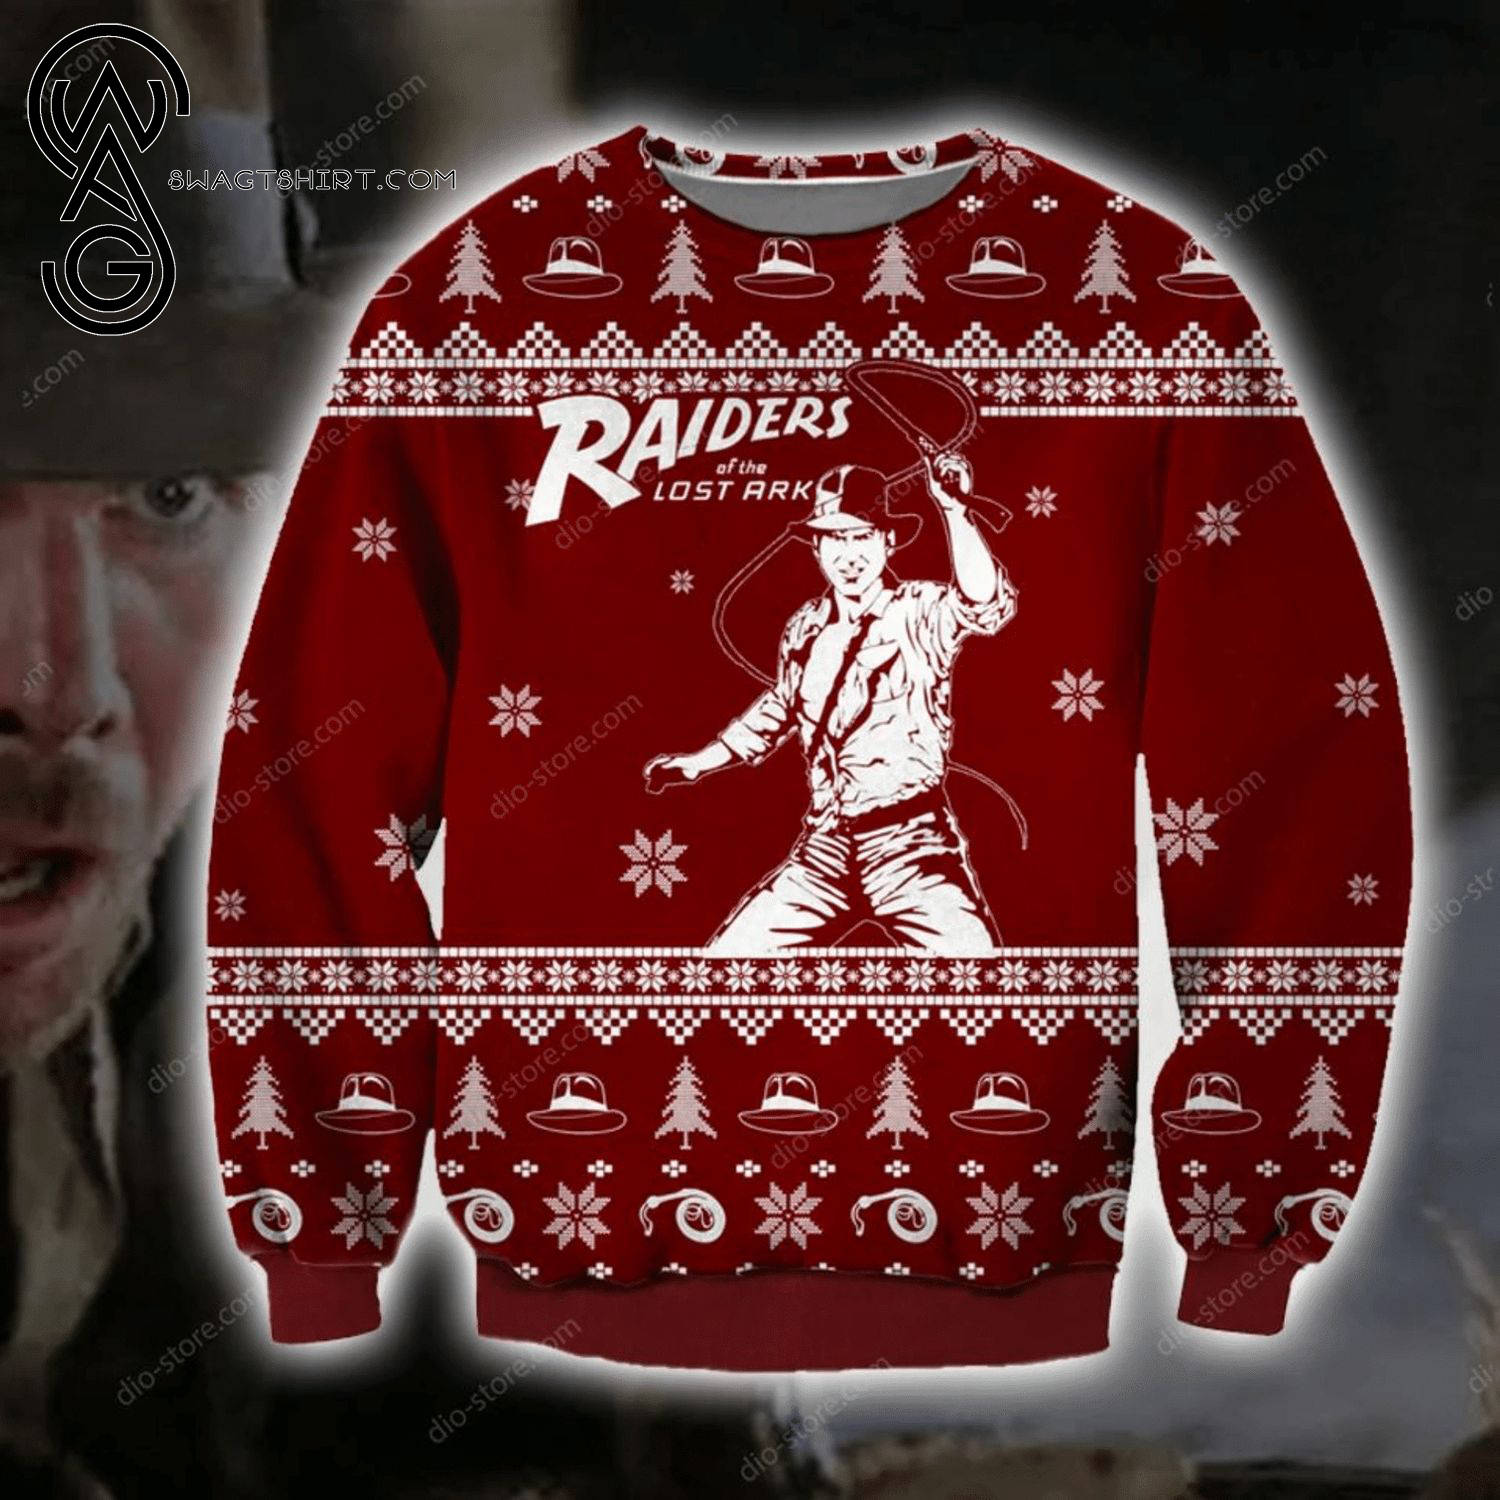 Raiders of the Lost Ark Full Print Ugly Christmas Sweater